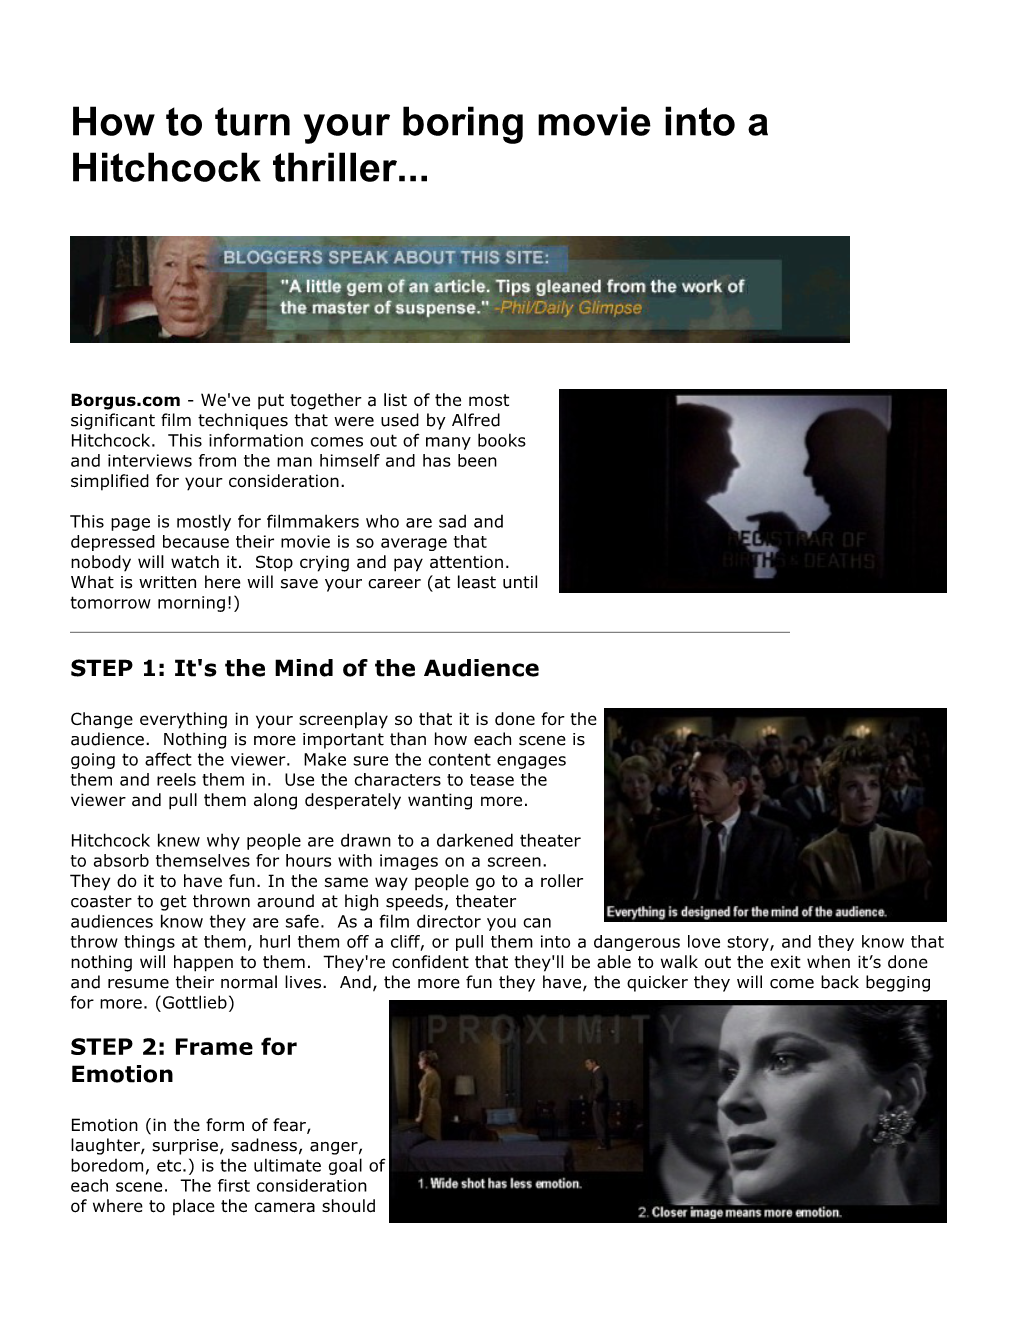 How to Turn Your Boring Movie Into a Hitchcock Thriller